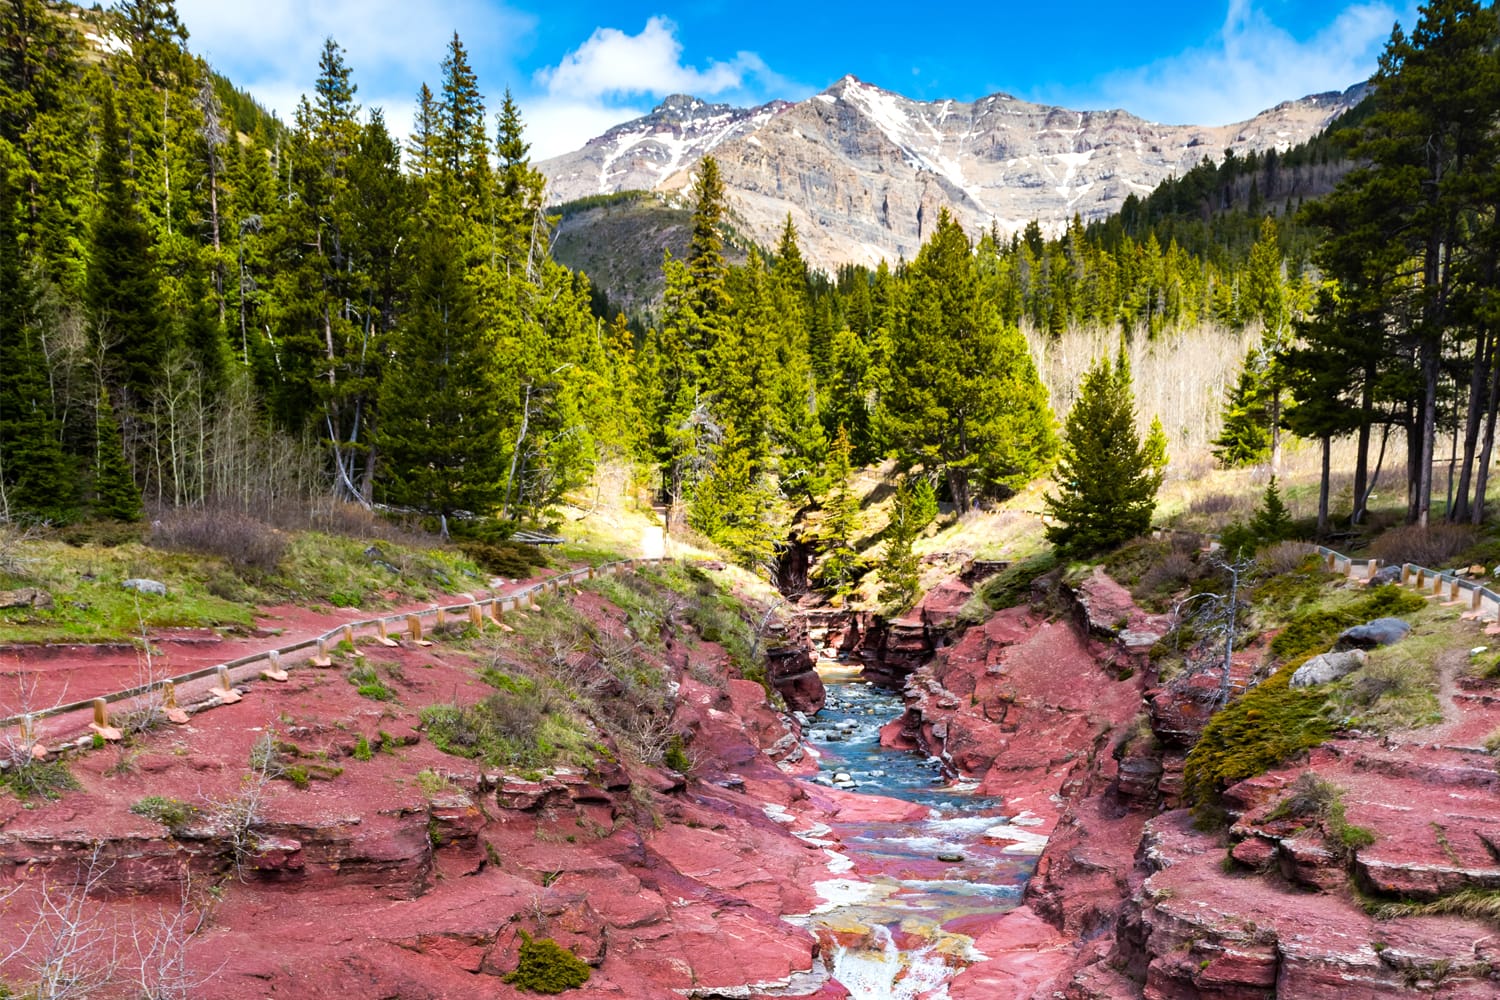 Scenic views of Red Rock Canyon, Waterton National Park Alberta Canada